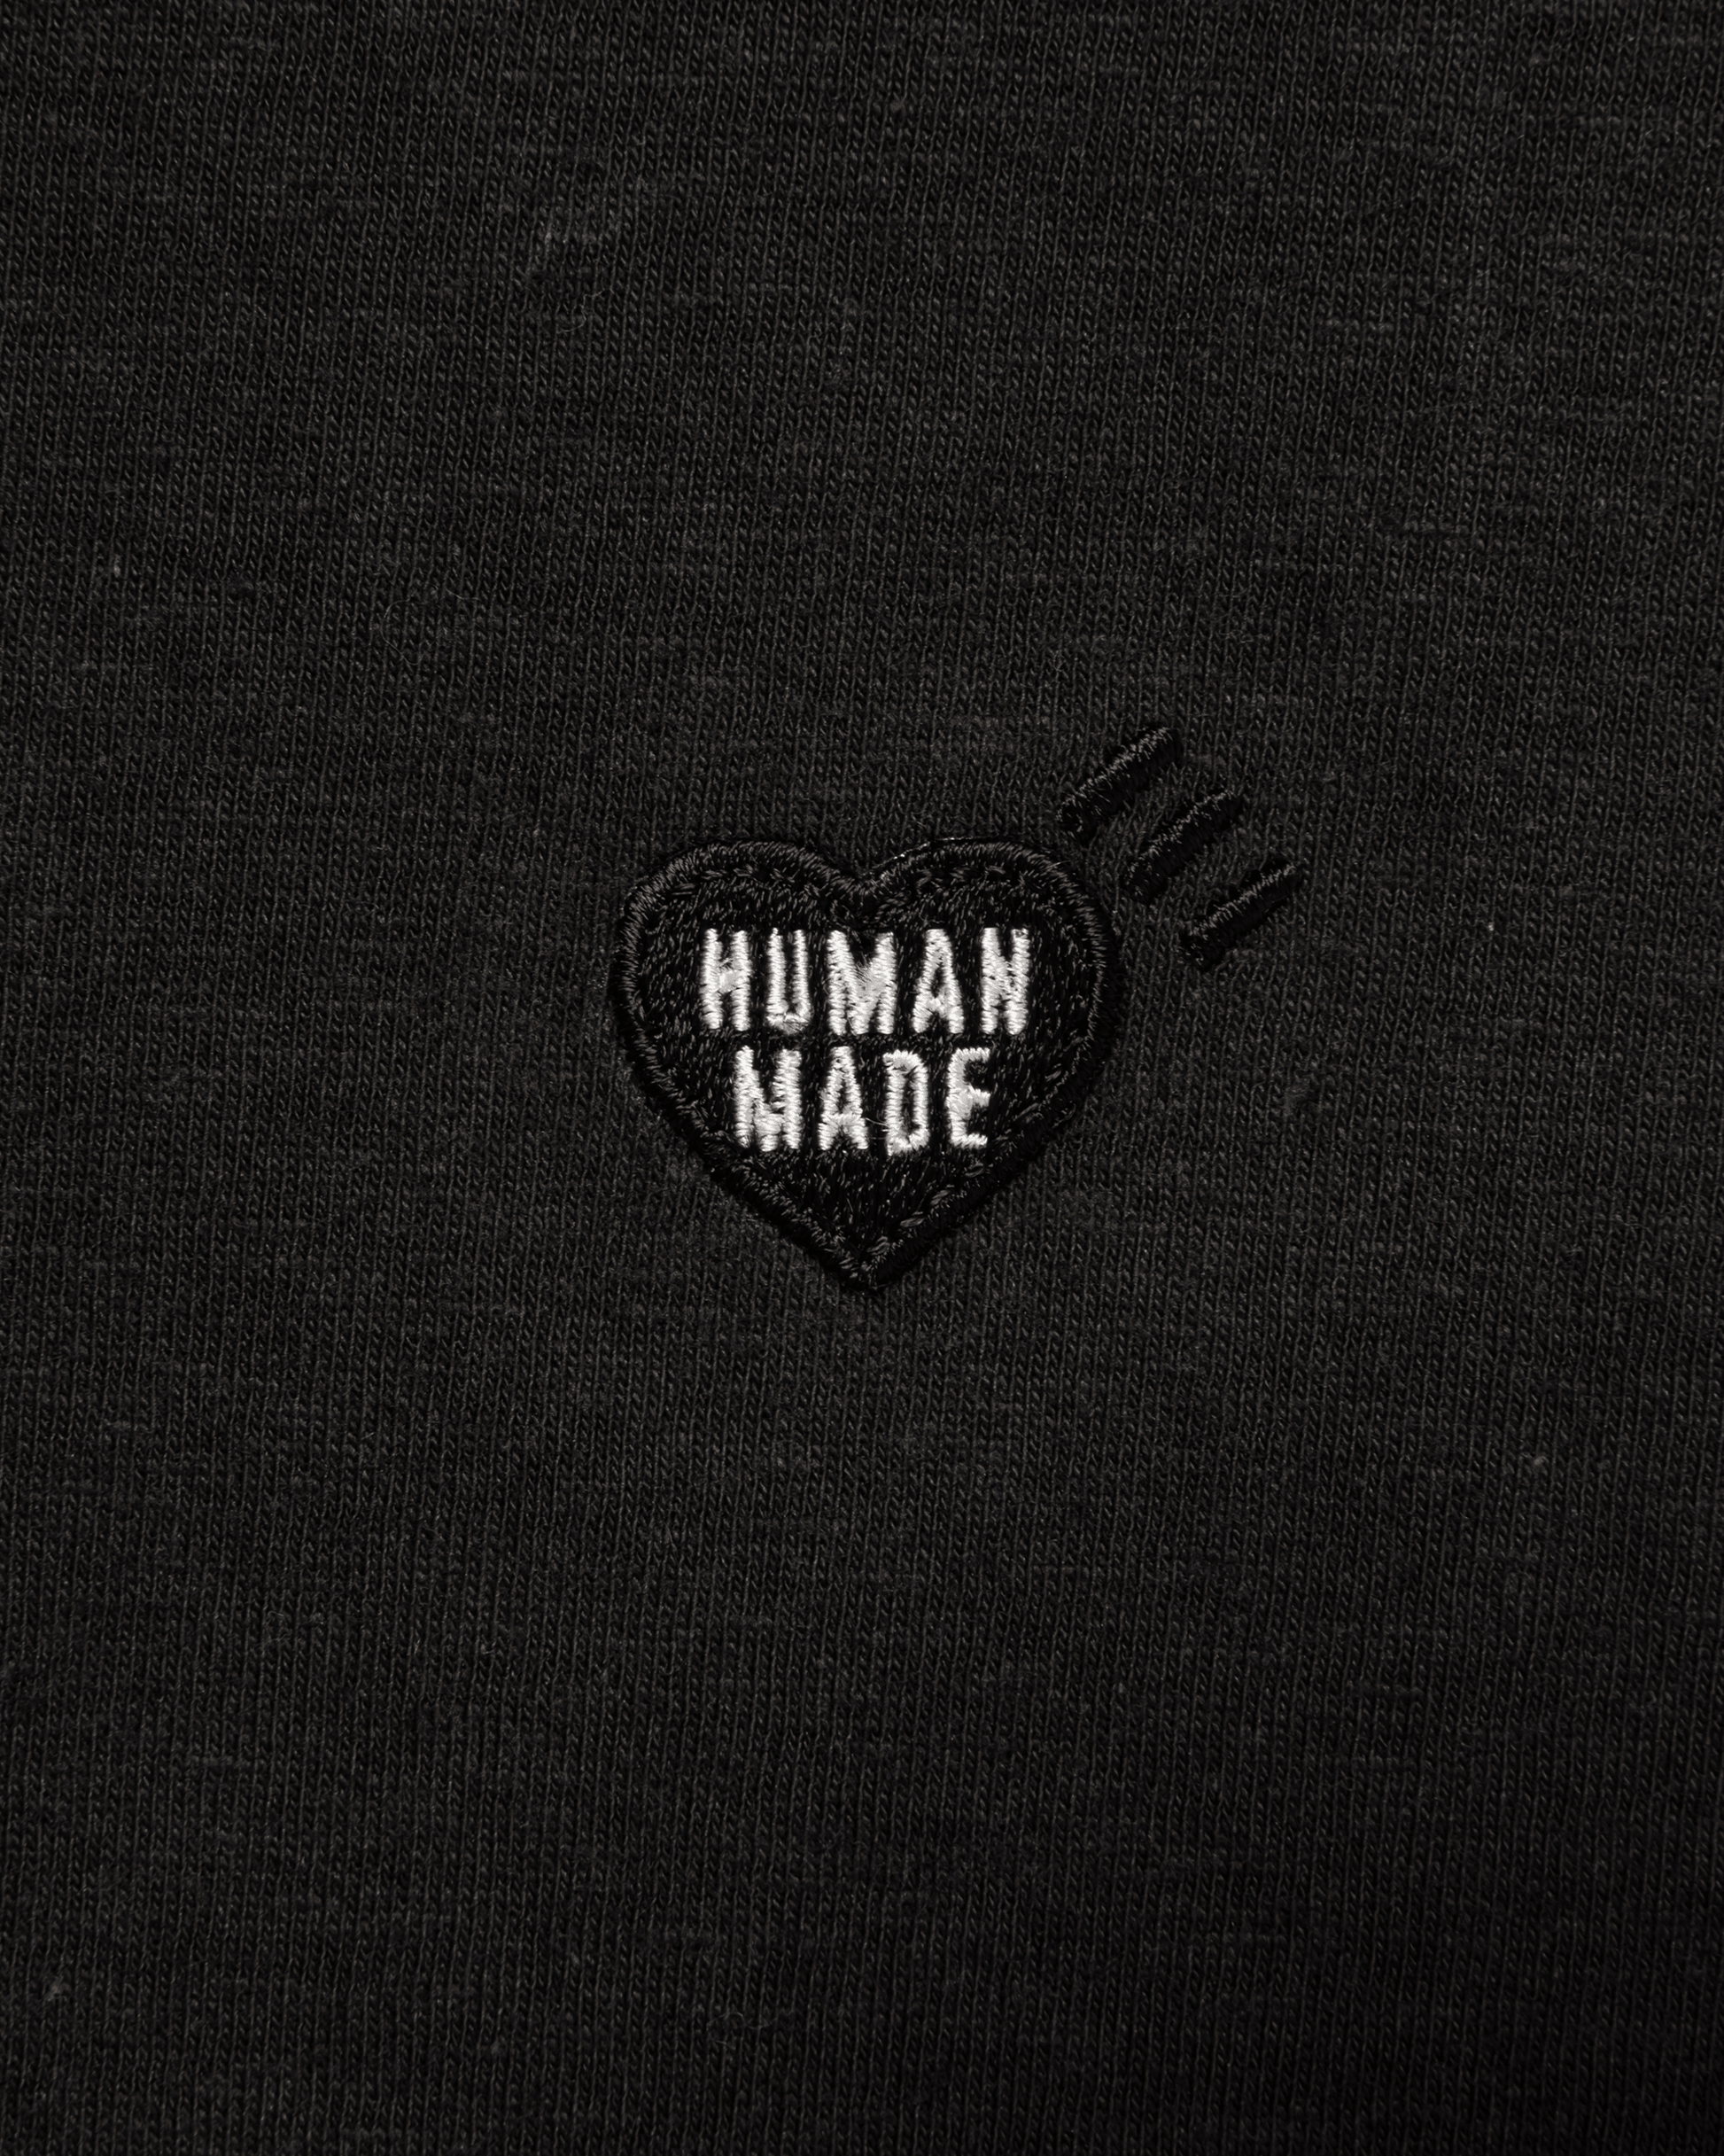 Graphic L/S T-Shirt - Human Made